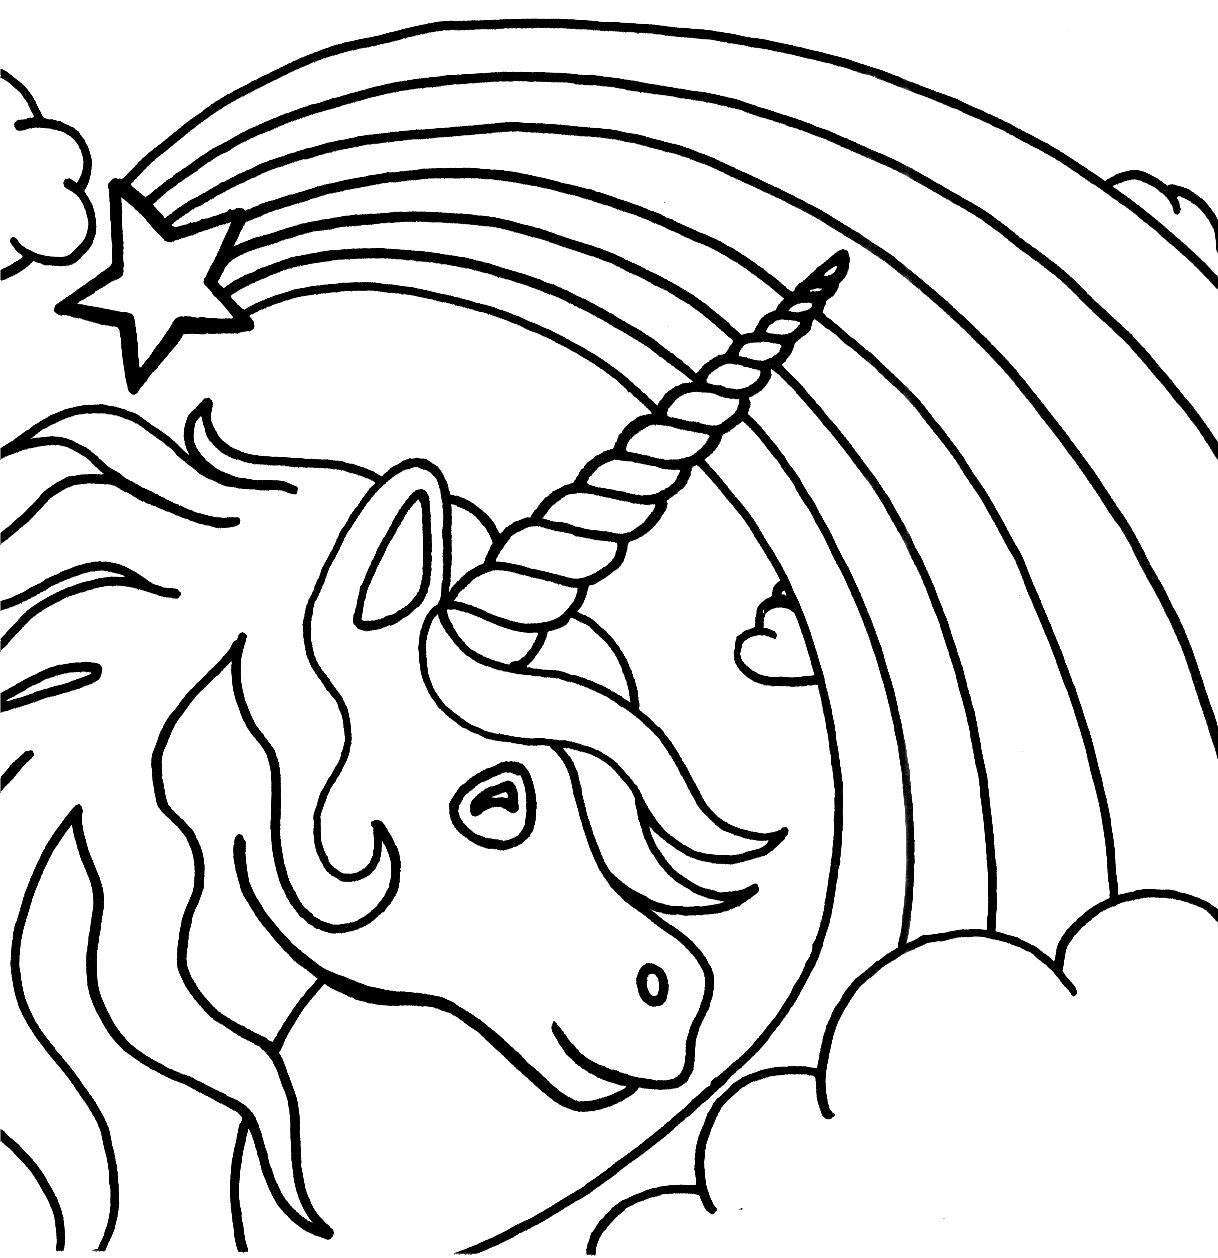 Free Printable Unicorn Coloring Pages For Kids | Fun | Unicorn - Free Printable Unicorn Coloring Pages